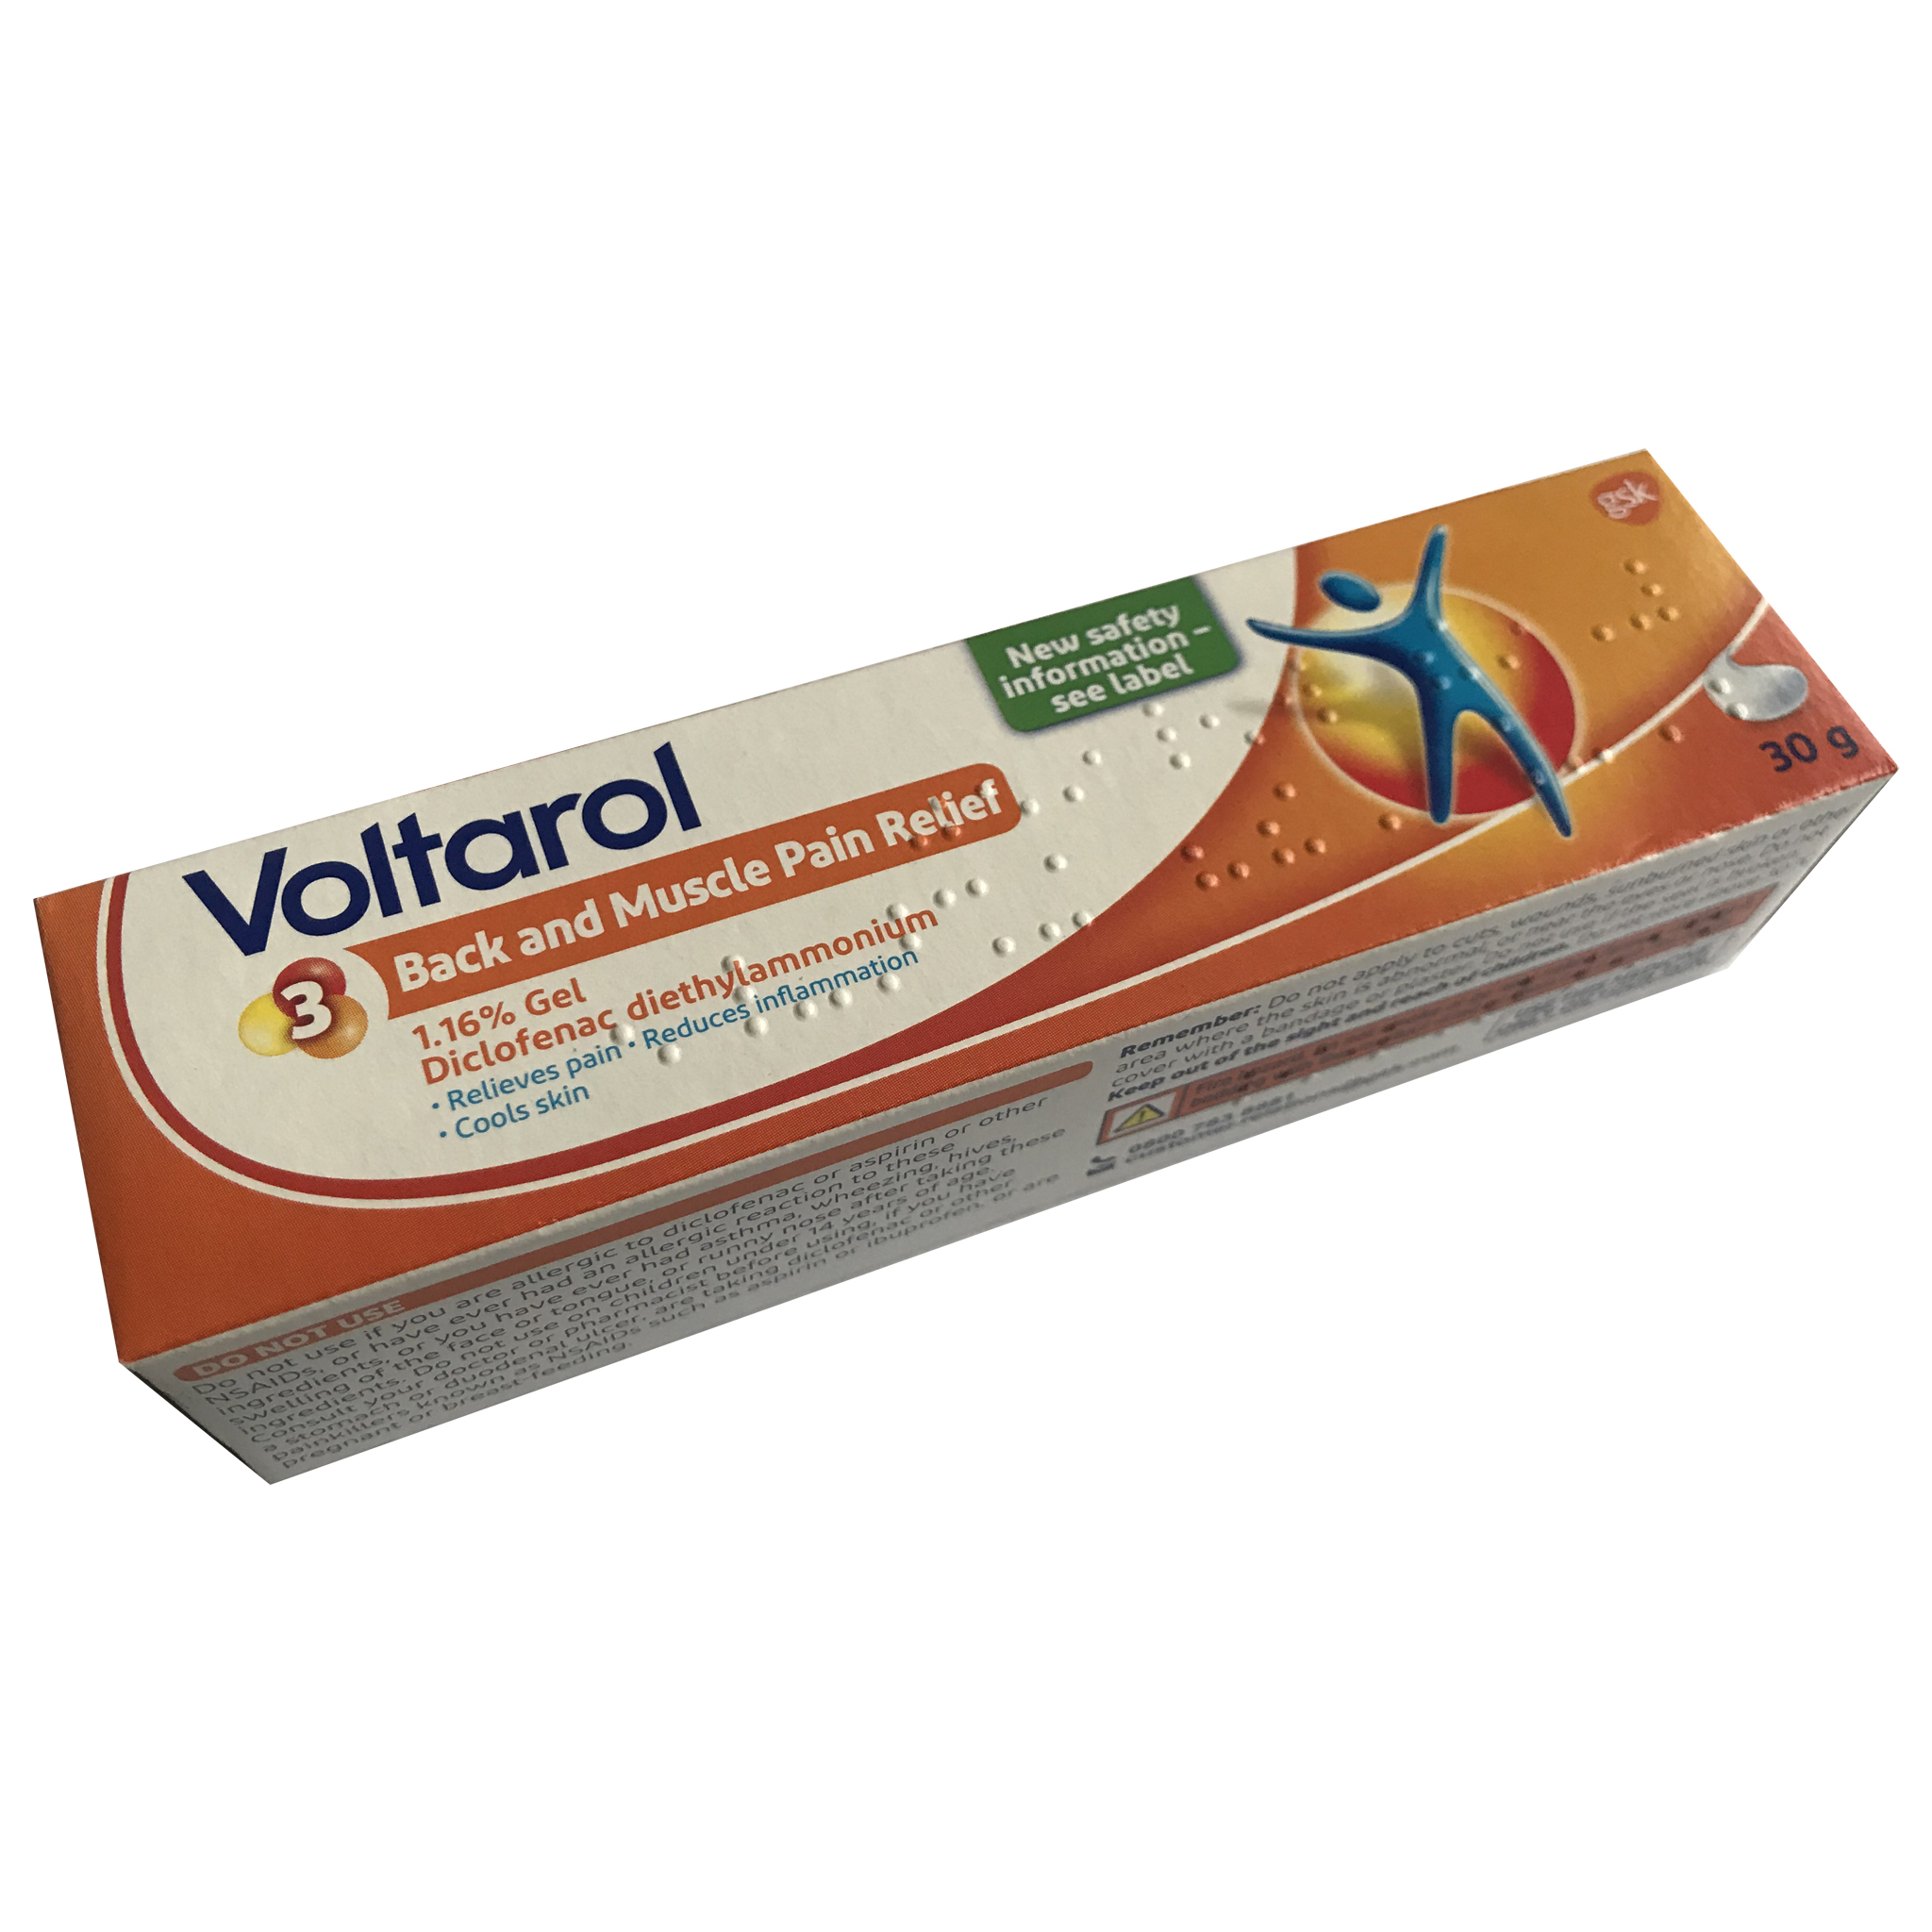 https://www.postmymeds.co.uk/wp-content/uploads/voltarol-back-and-muscle-pain-relief-30g.jpg